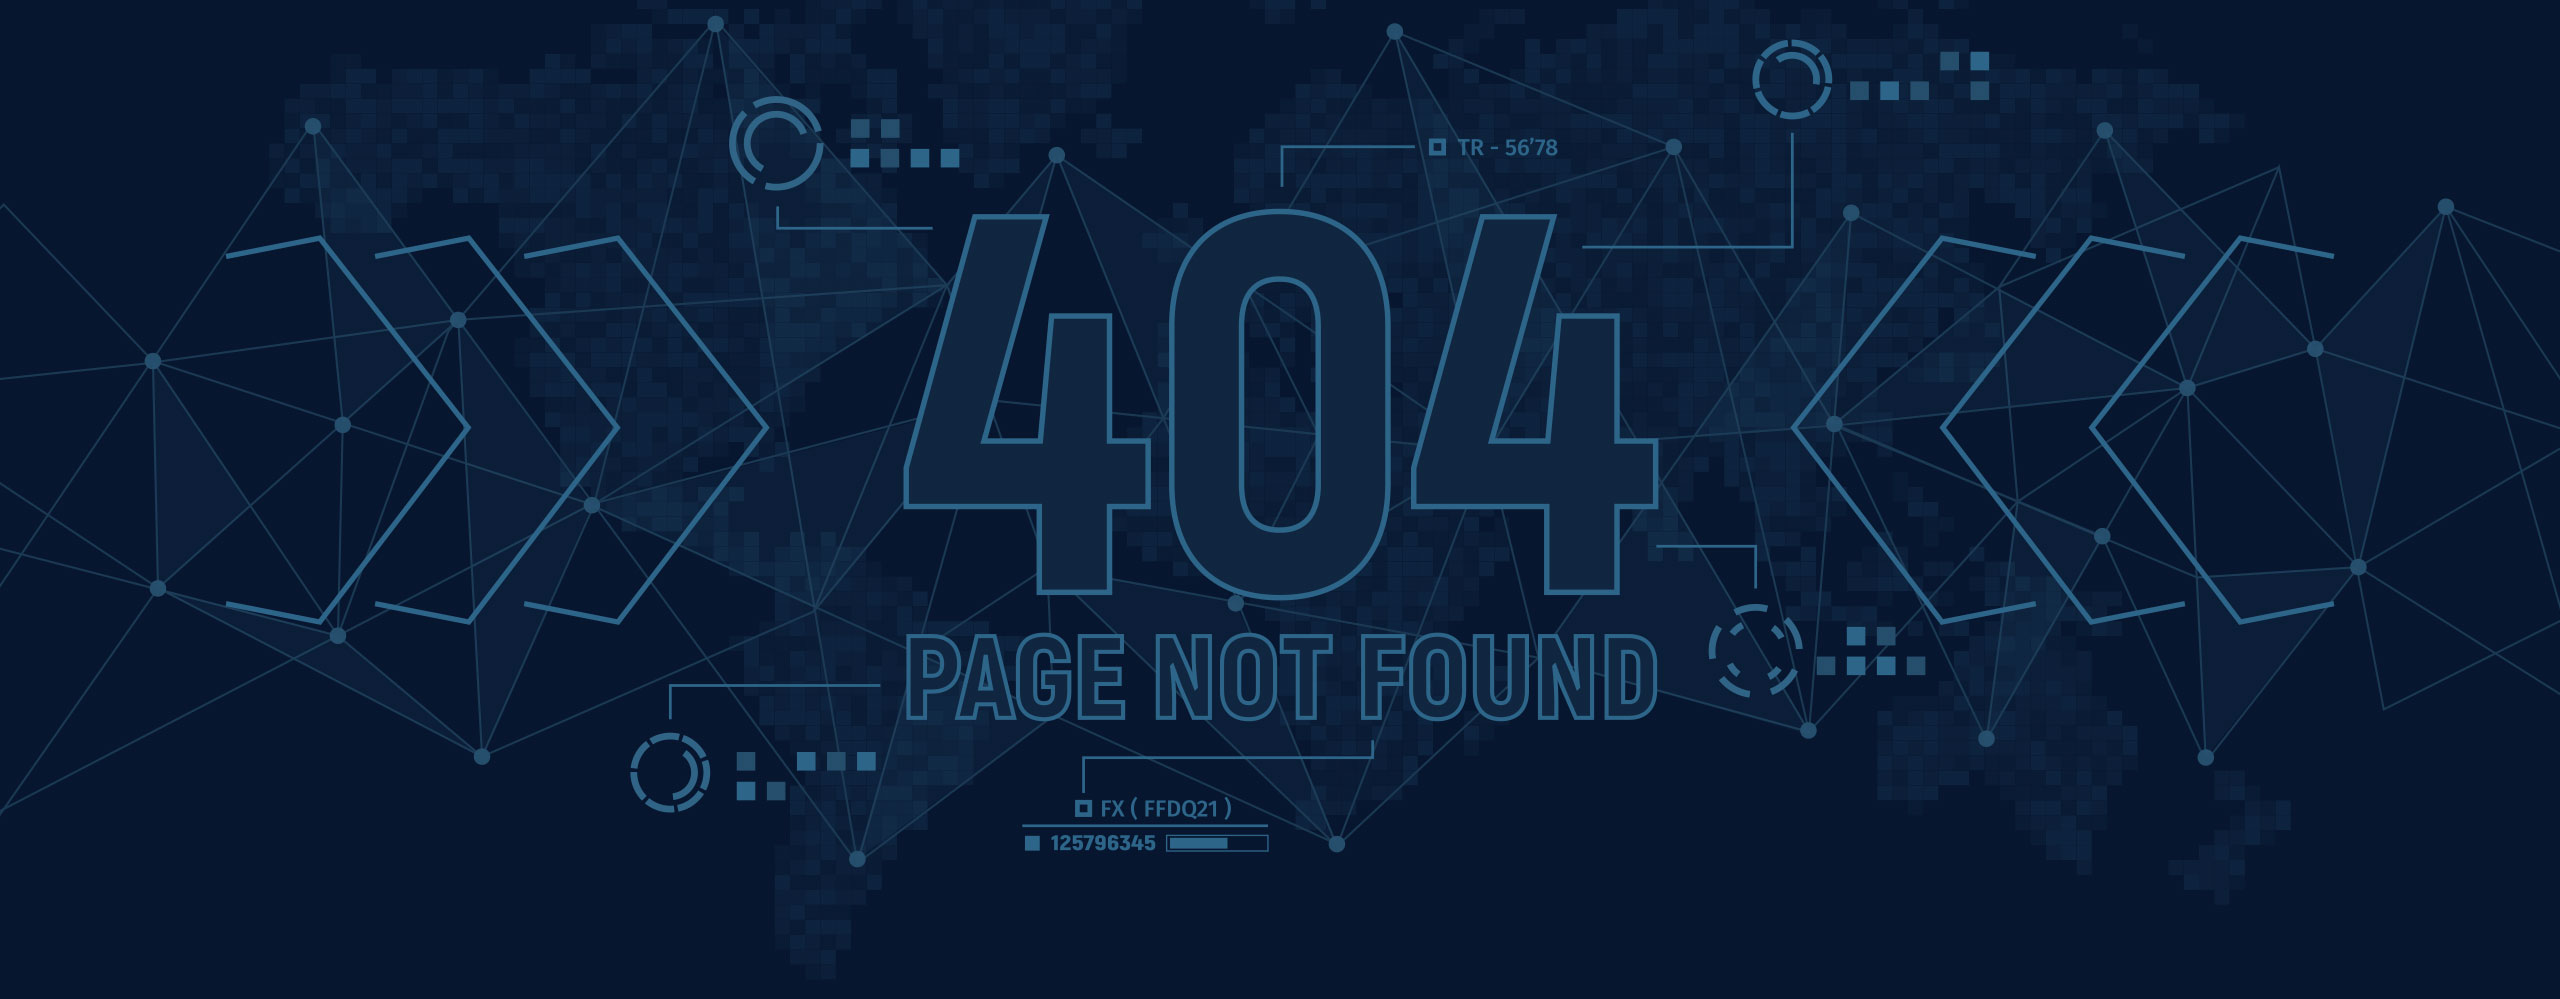 404 Error: Page Missing